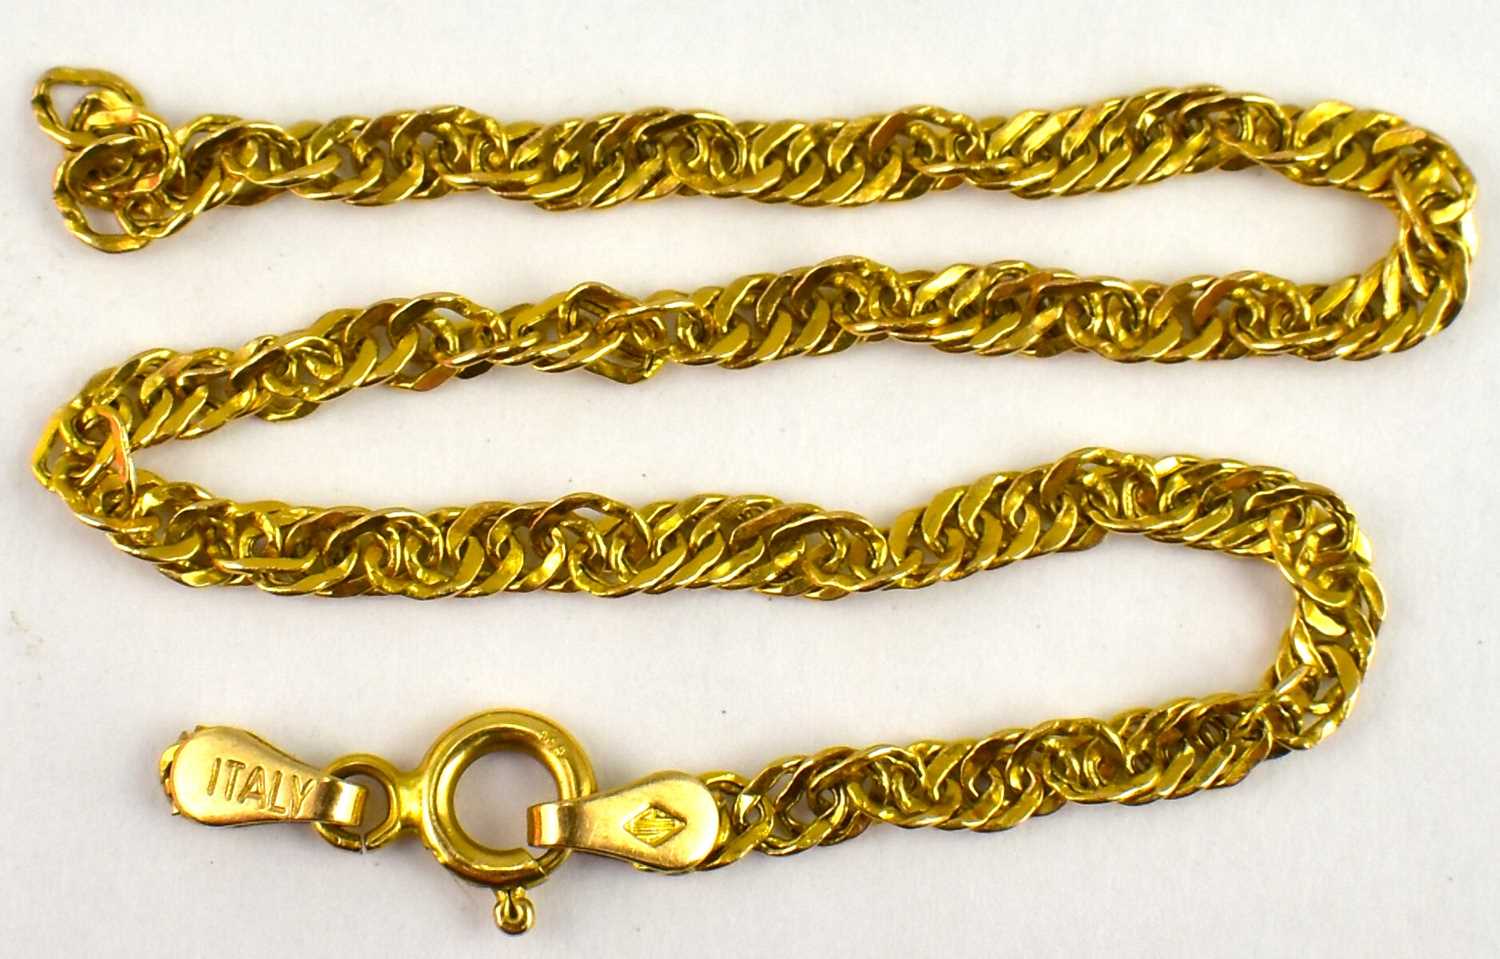 14ct gold Bracelets | Second Hand Bracelets from William May